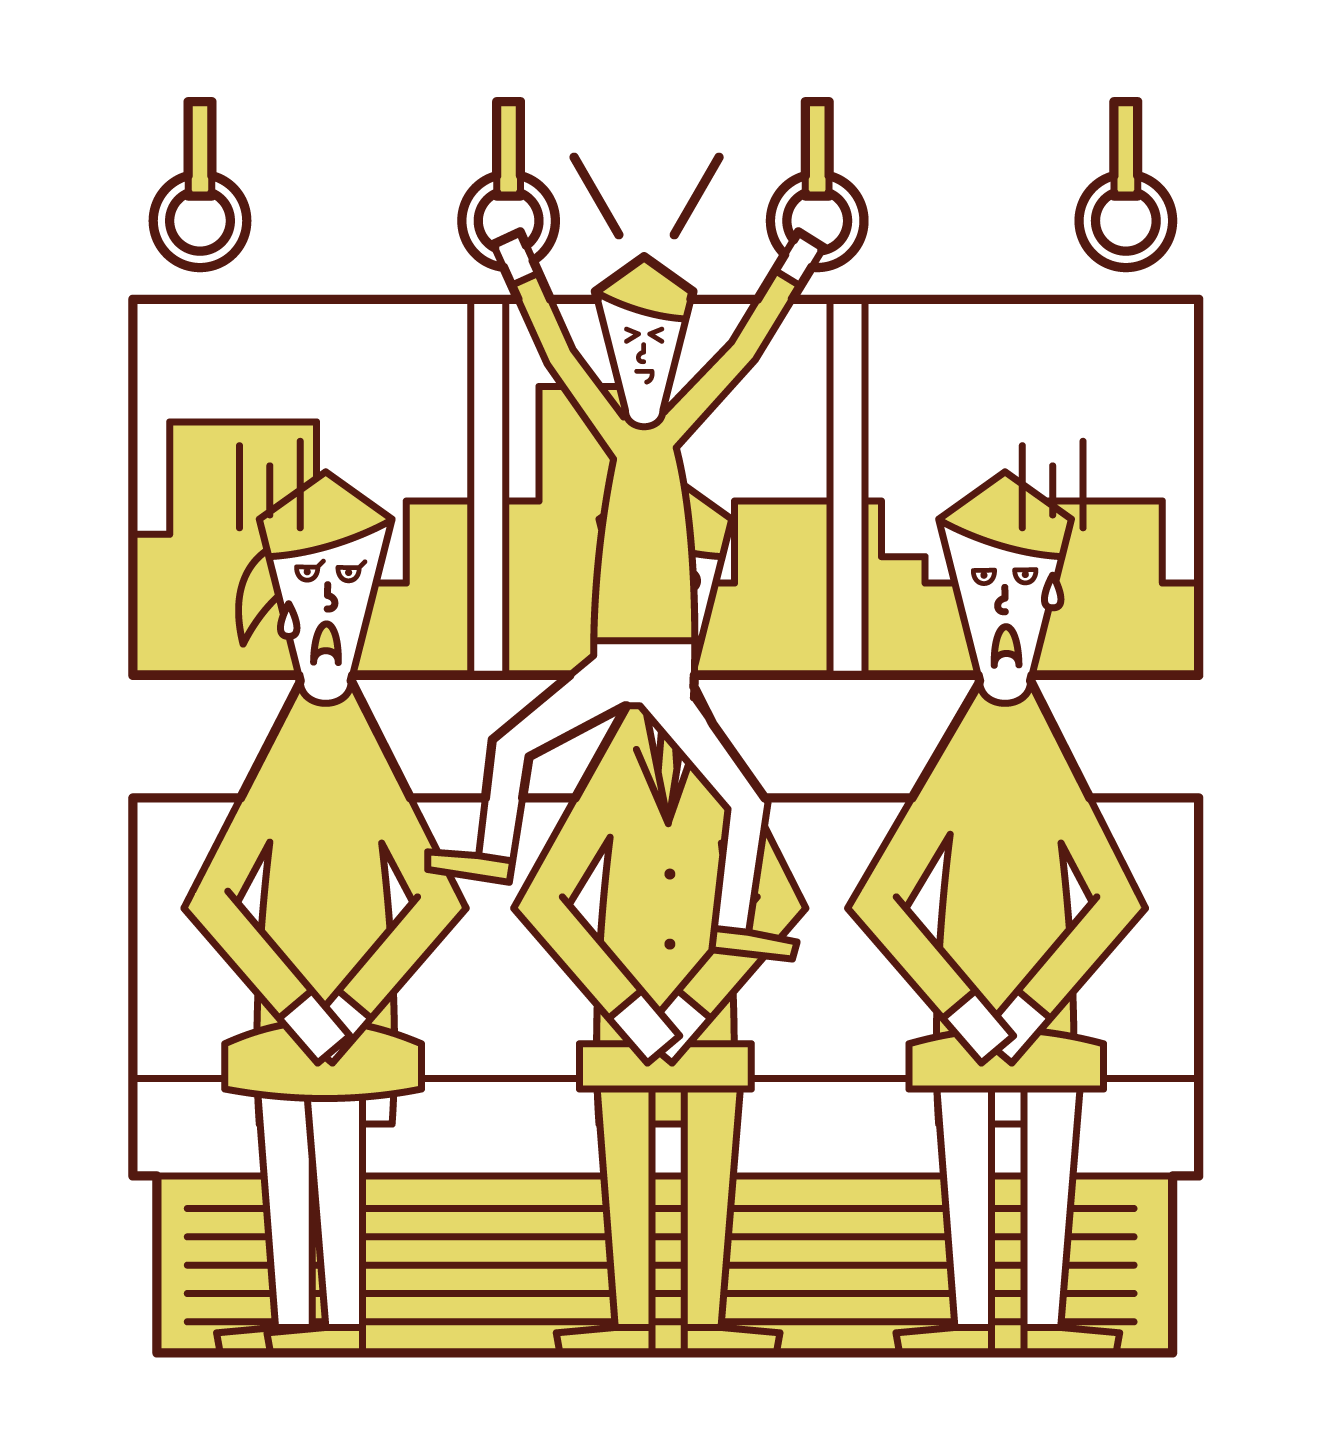 Illustration of a child (boy) hanging on a hanging leather on a train